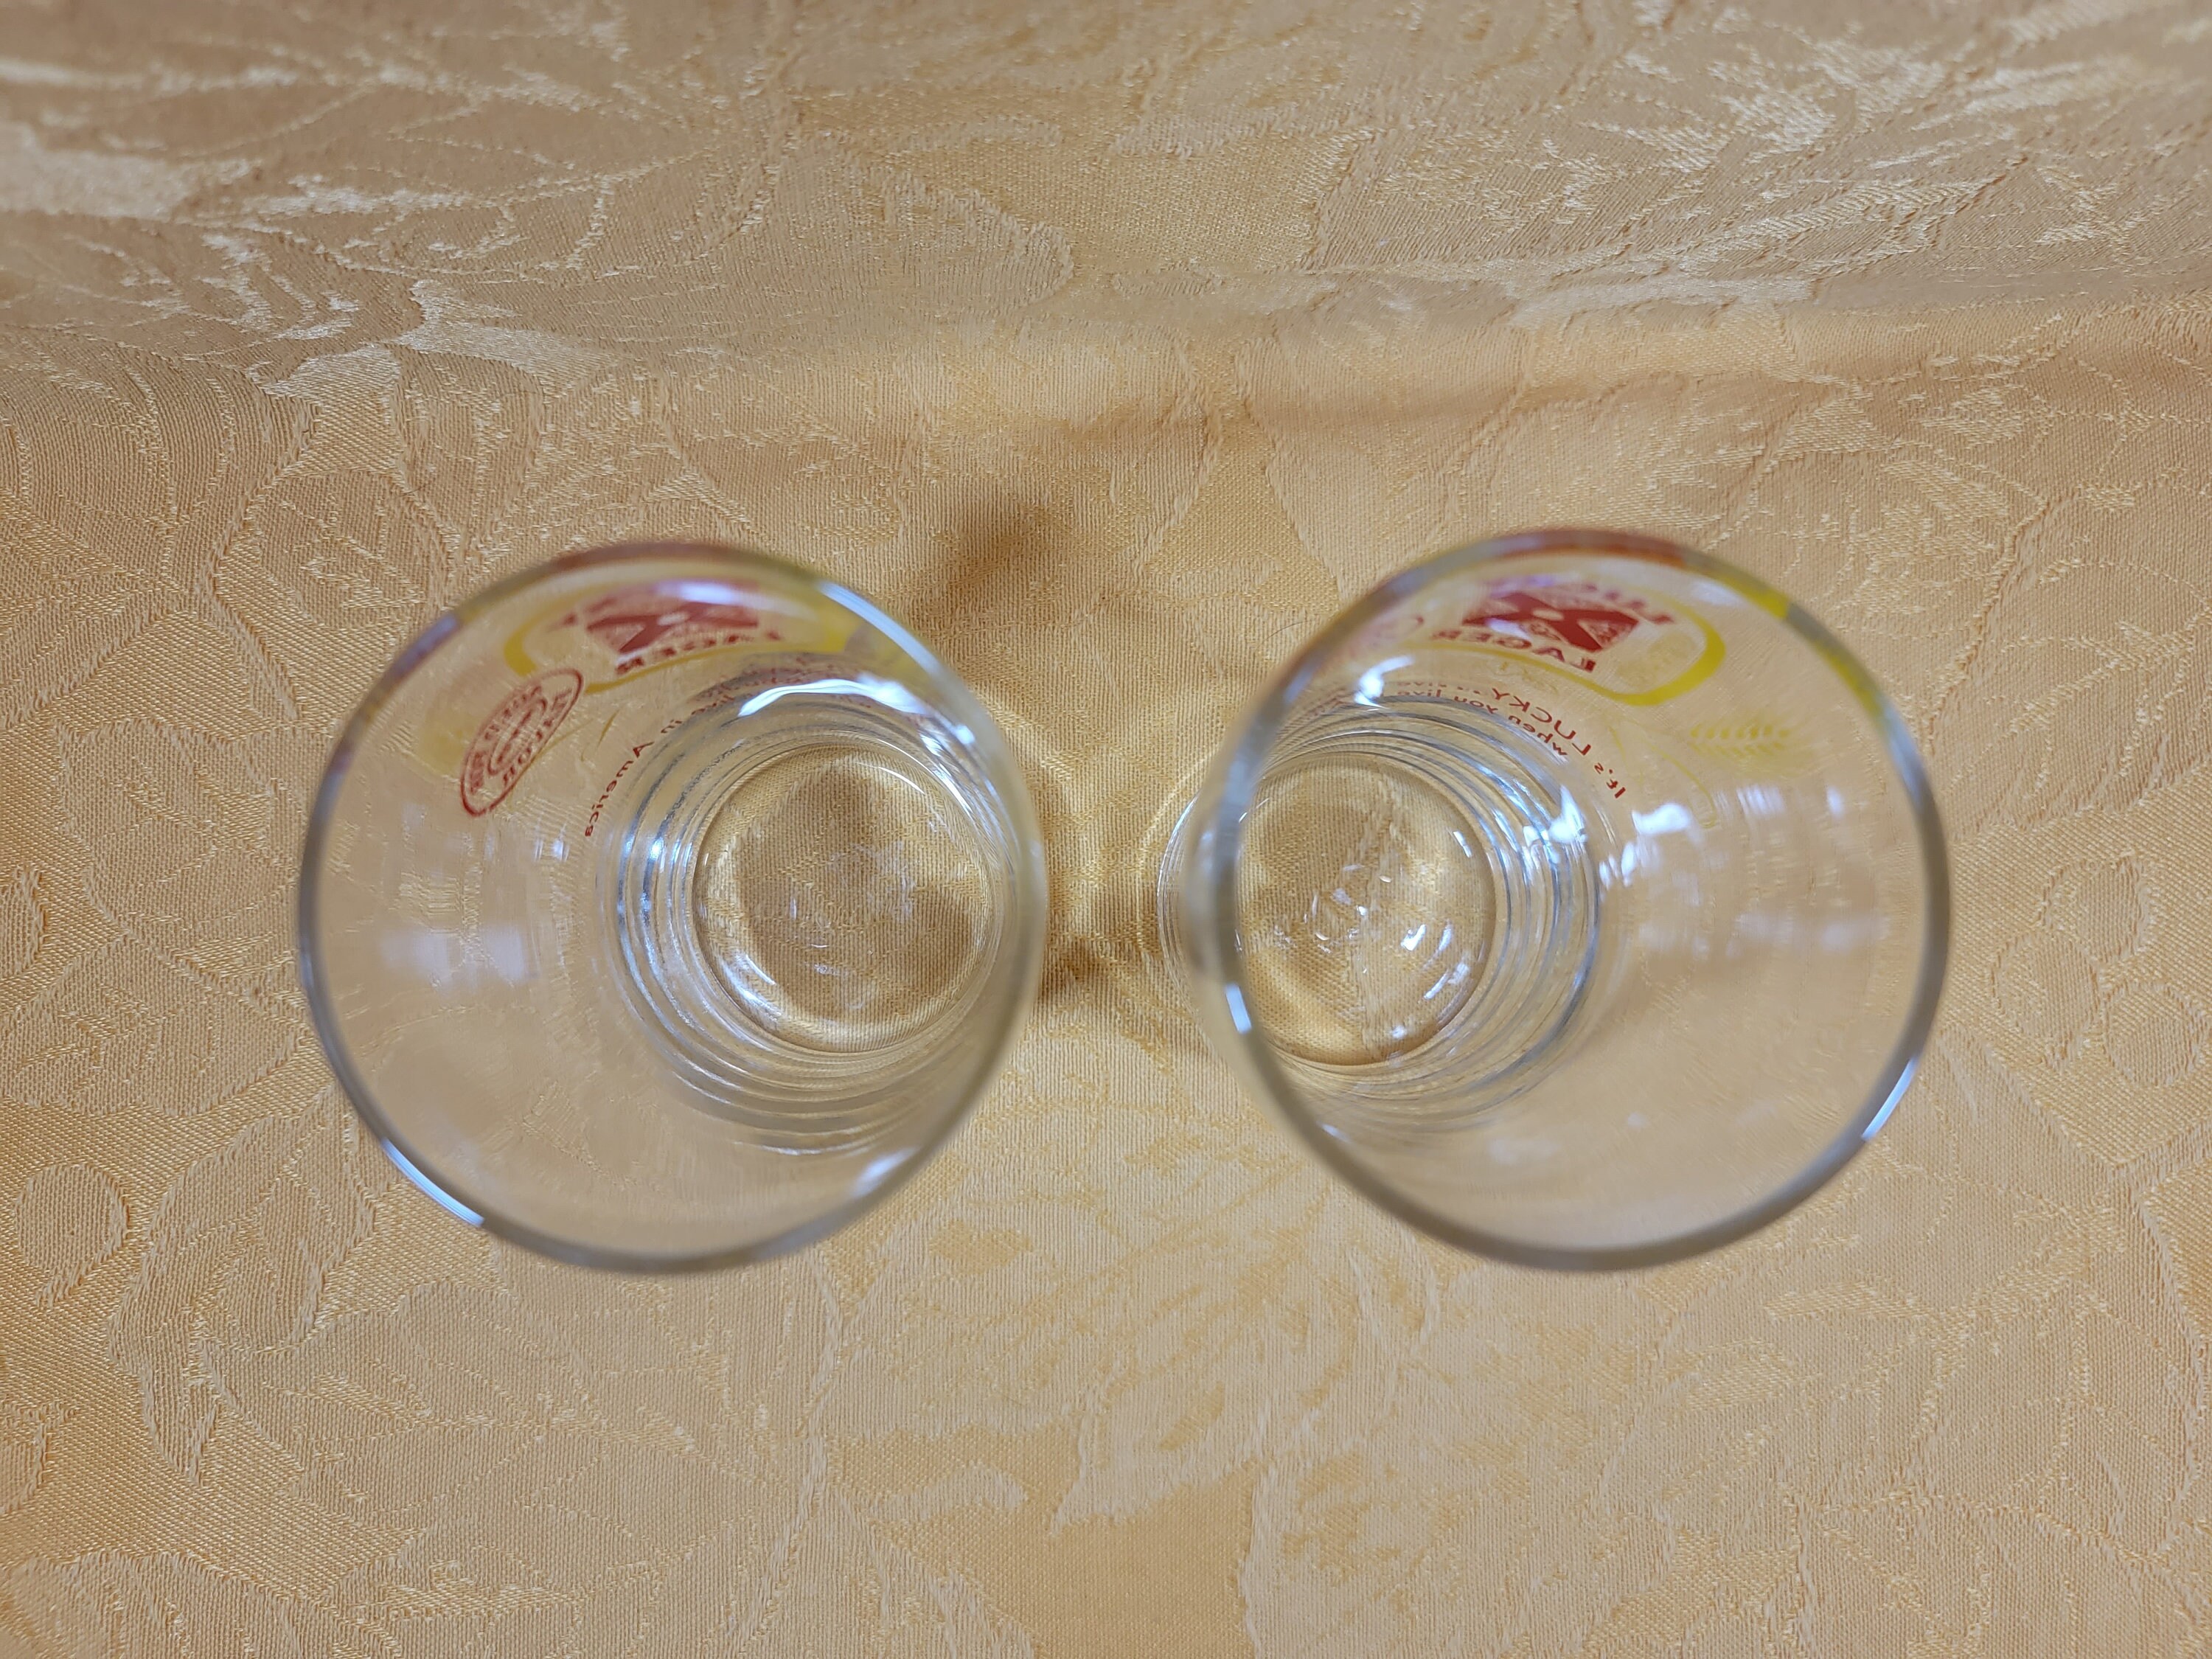 1950's. 1960's Lucky Lager x Small Beer Glasses, Set of 2 